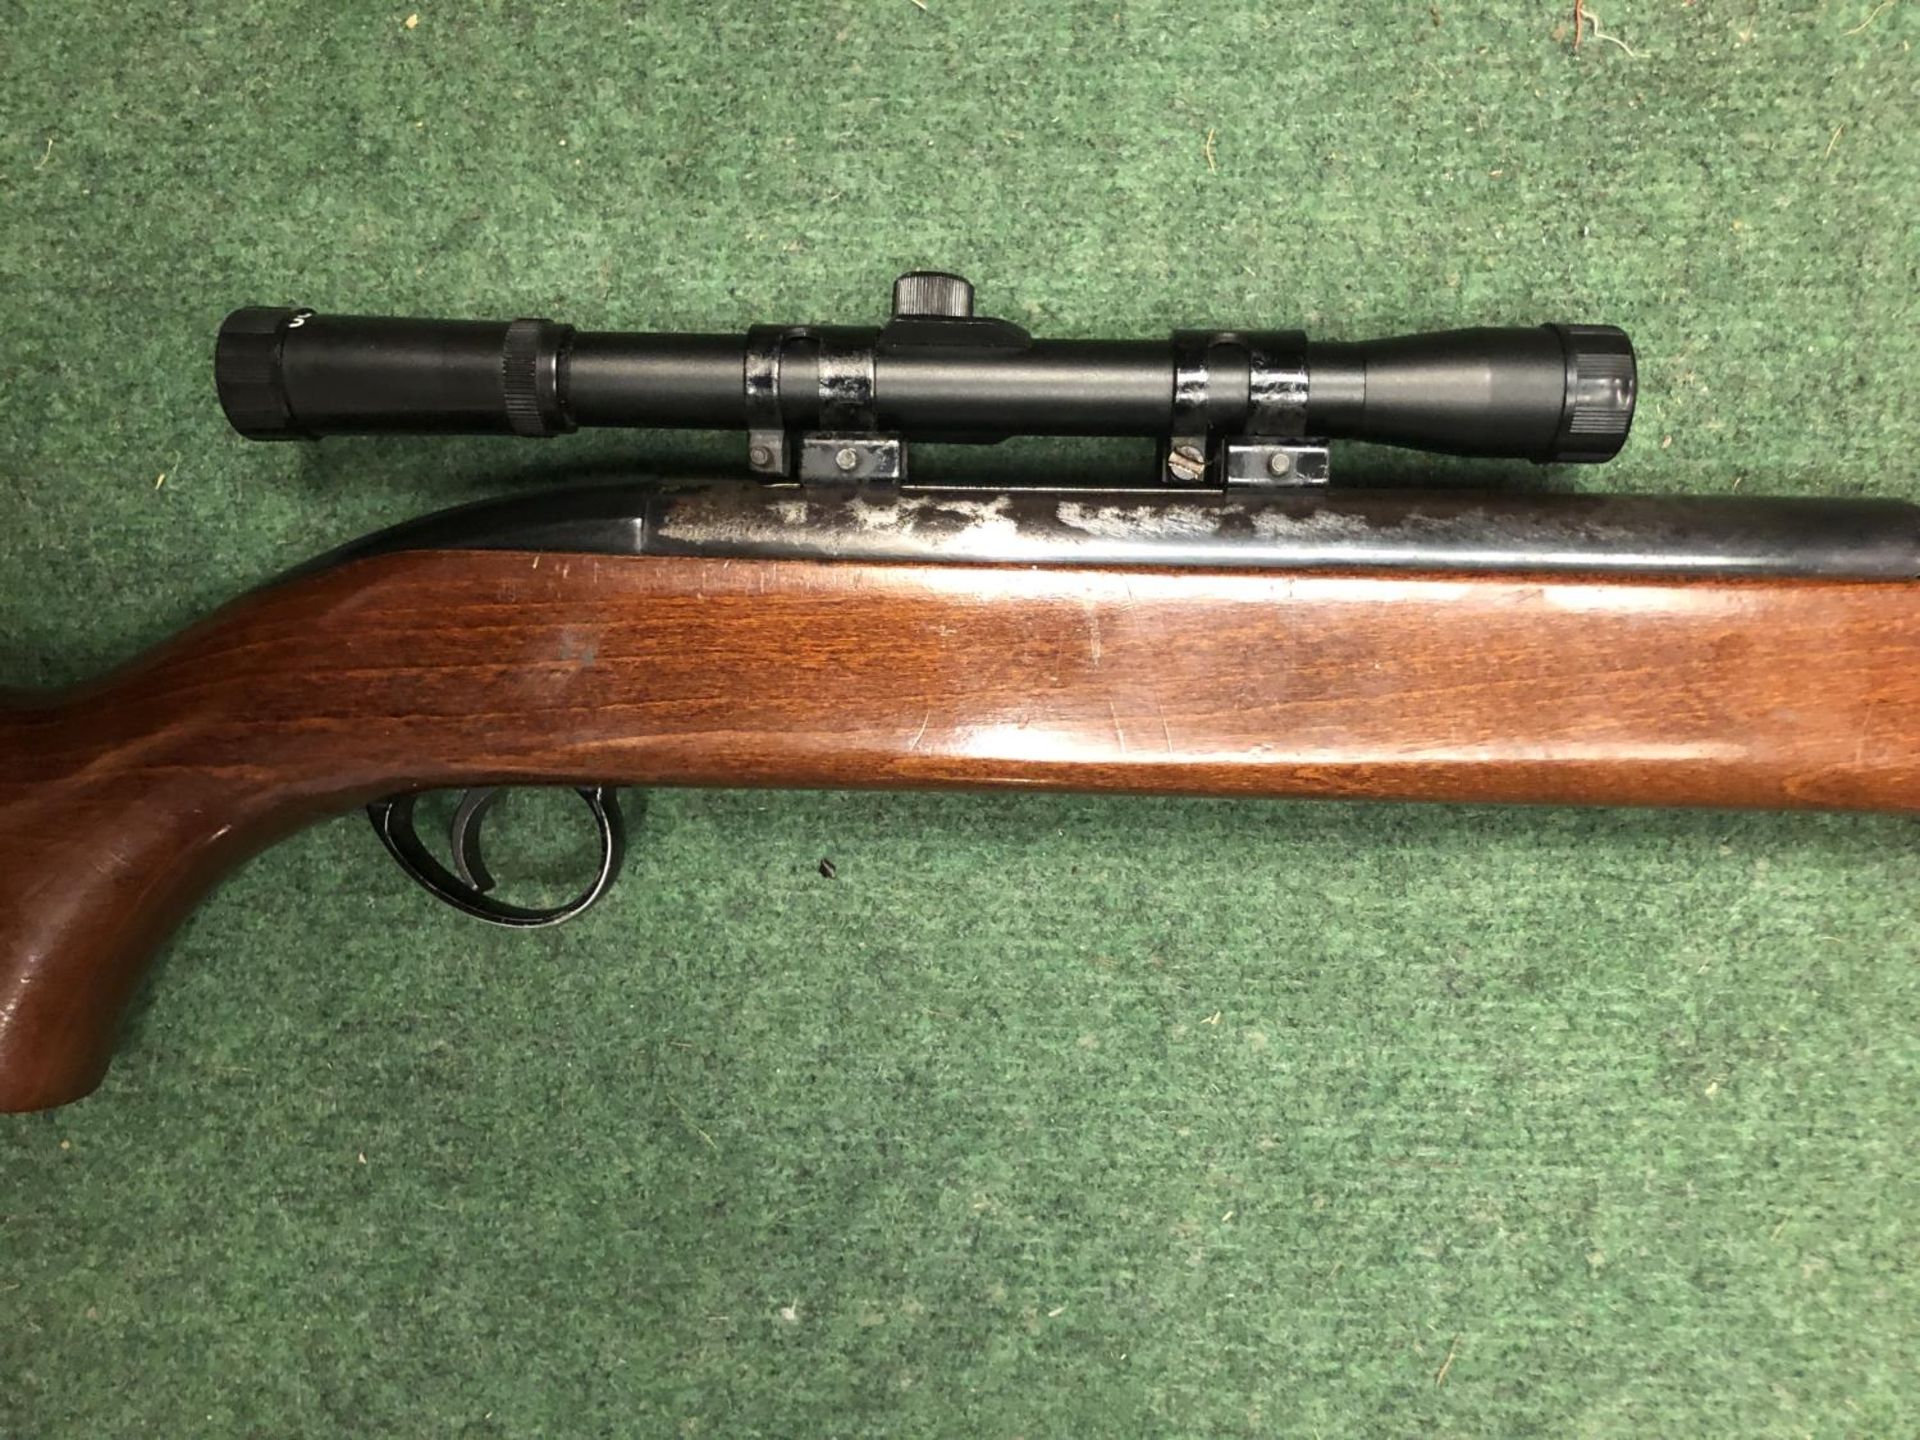 A BSA AIRSPORTER .22 CALIBRE AIR RIFLE, 47CM BARREL COMPLETE WITH TELESCOPIC SIGHT - Image 2 of 3